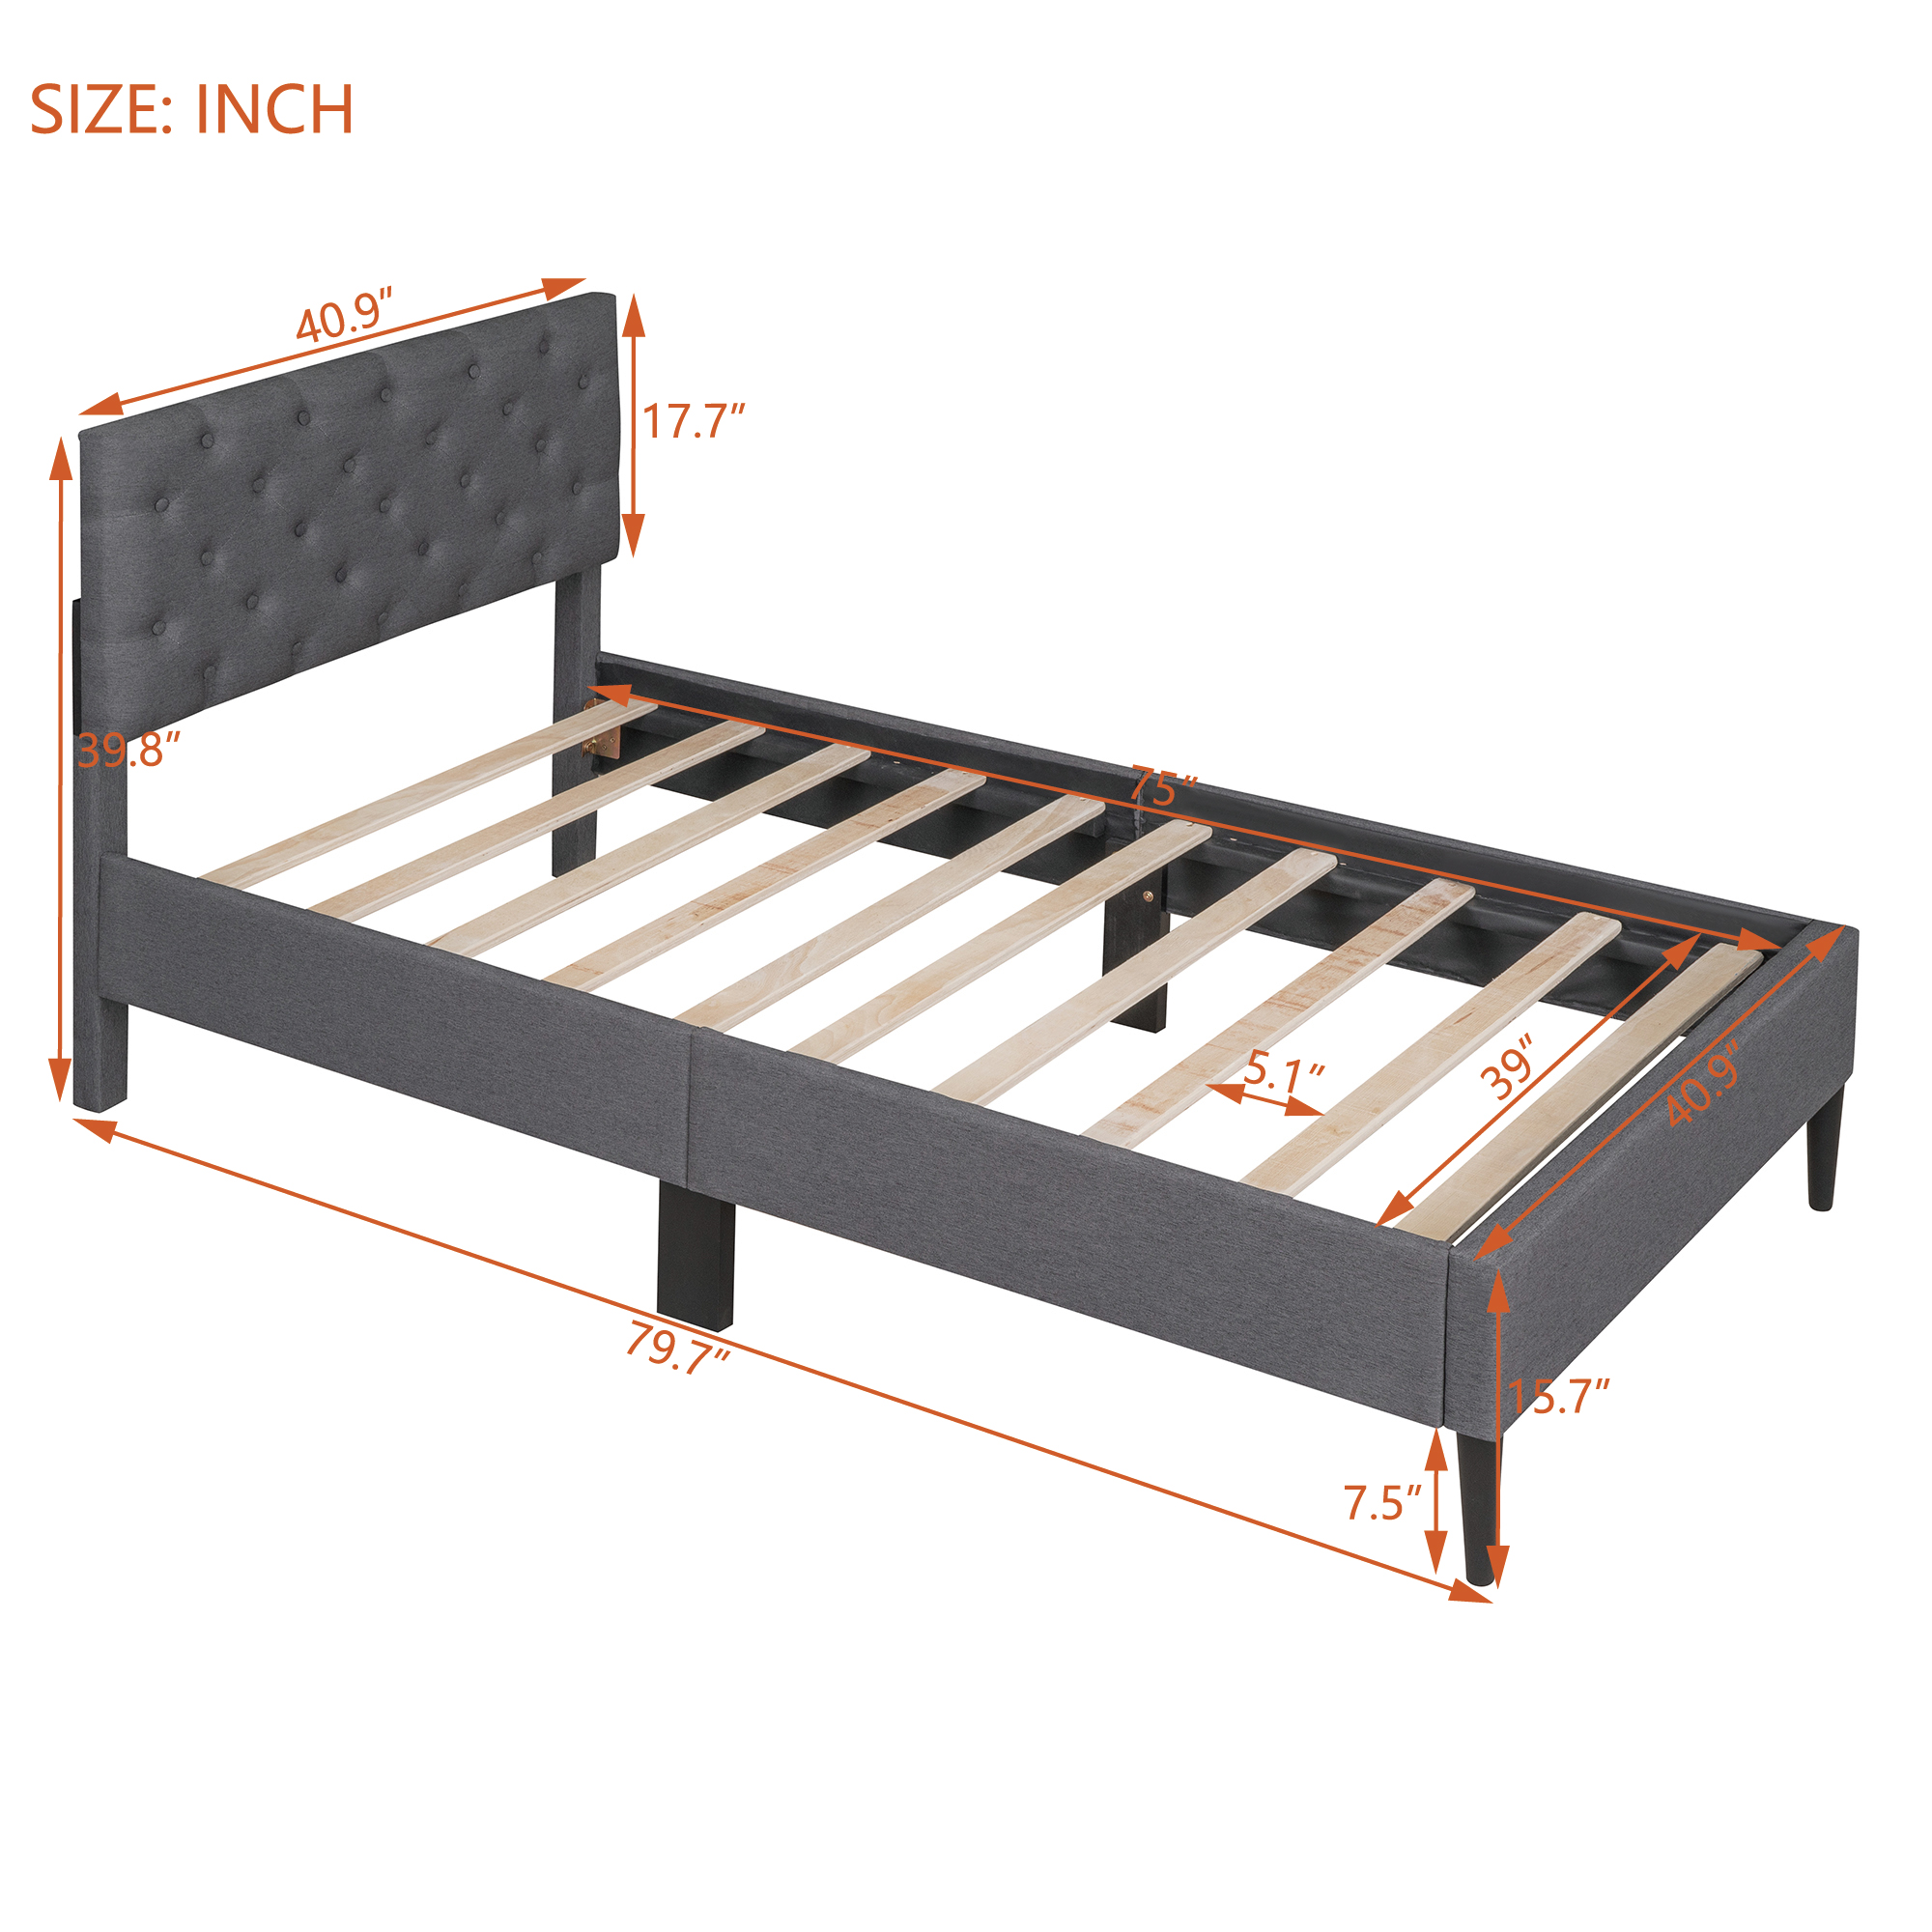 Modern Upholstered Platform Twin Bed Frame, Heavy Duty Twin Bed Frame with Headboard, Gray Twin Bed Frame with Wood Slat Support, Mattress Foundation for Adults Kids, No Box Spring Needed, Q10586 - image 4 of 10